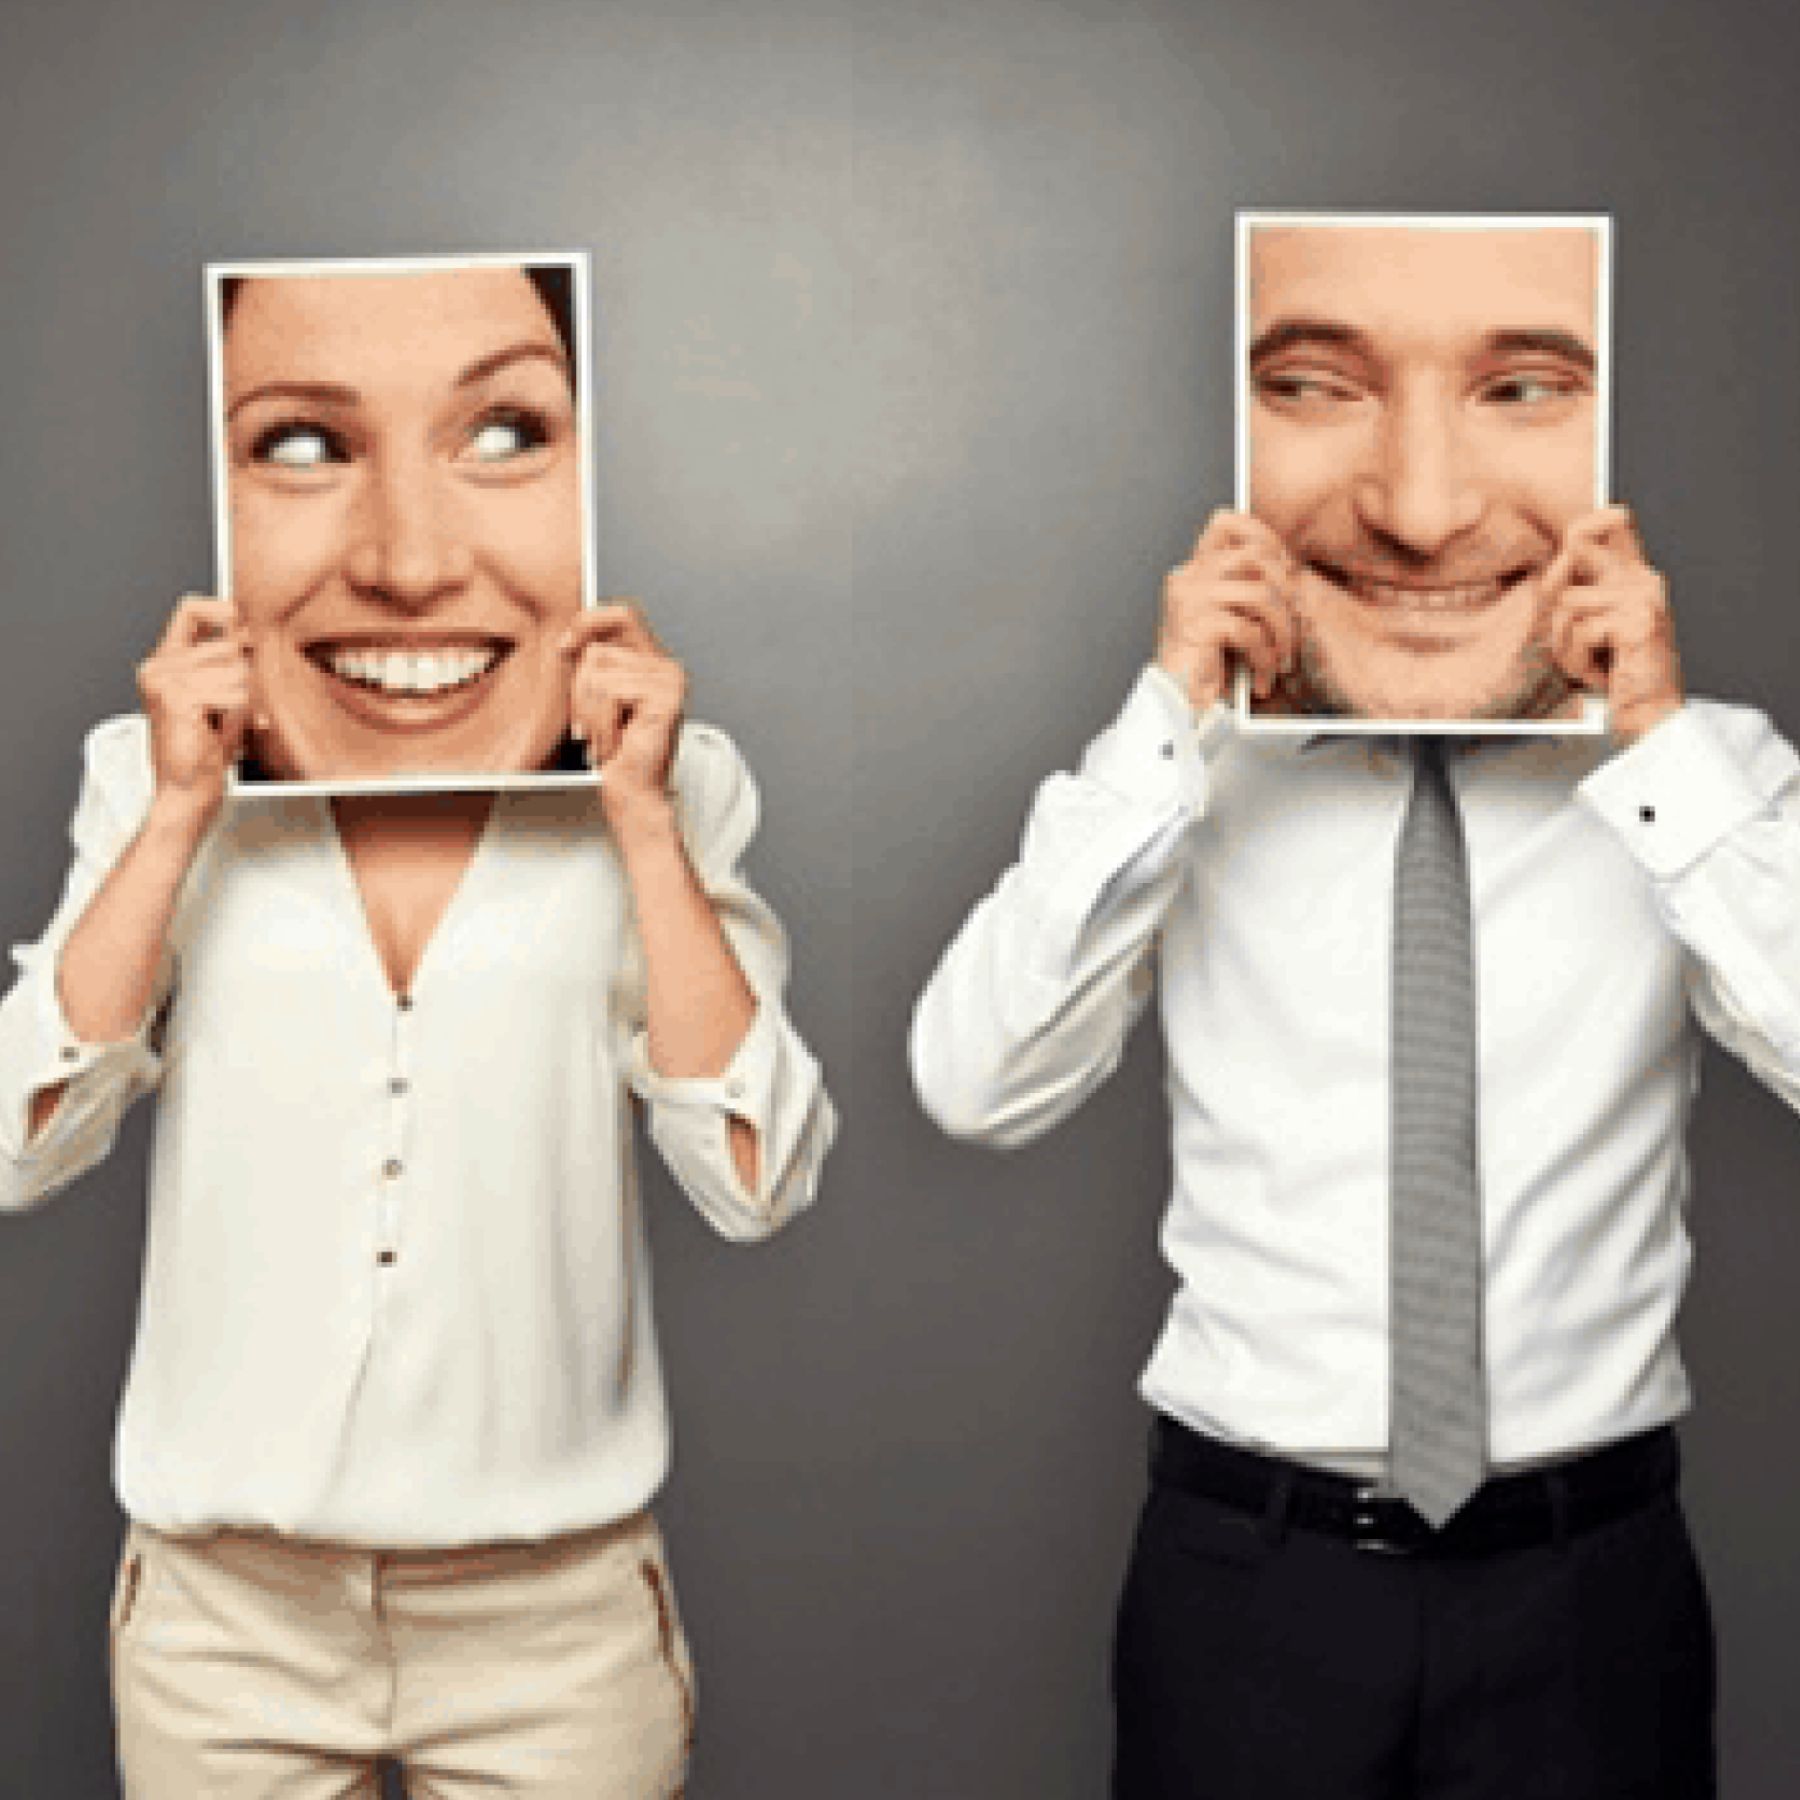 A man and a woman are holding pictures of their faces in front of their faces